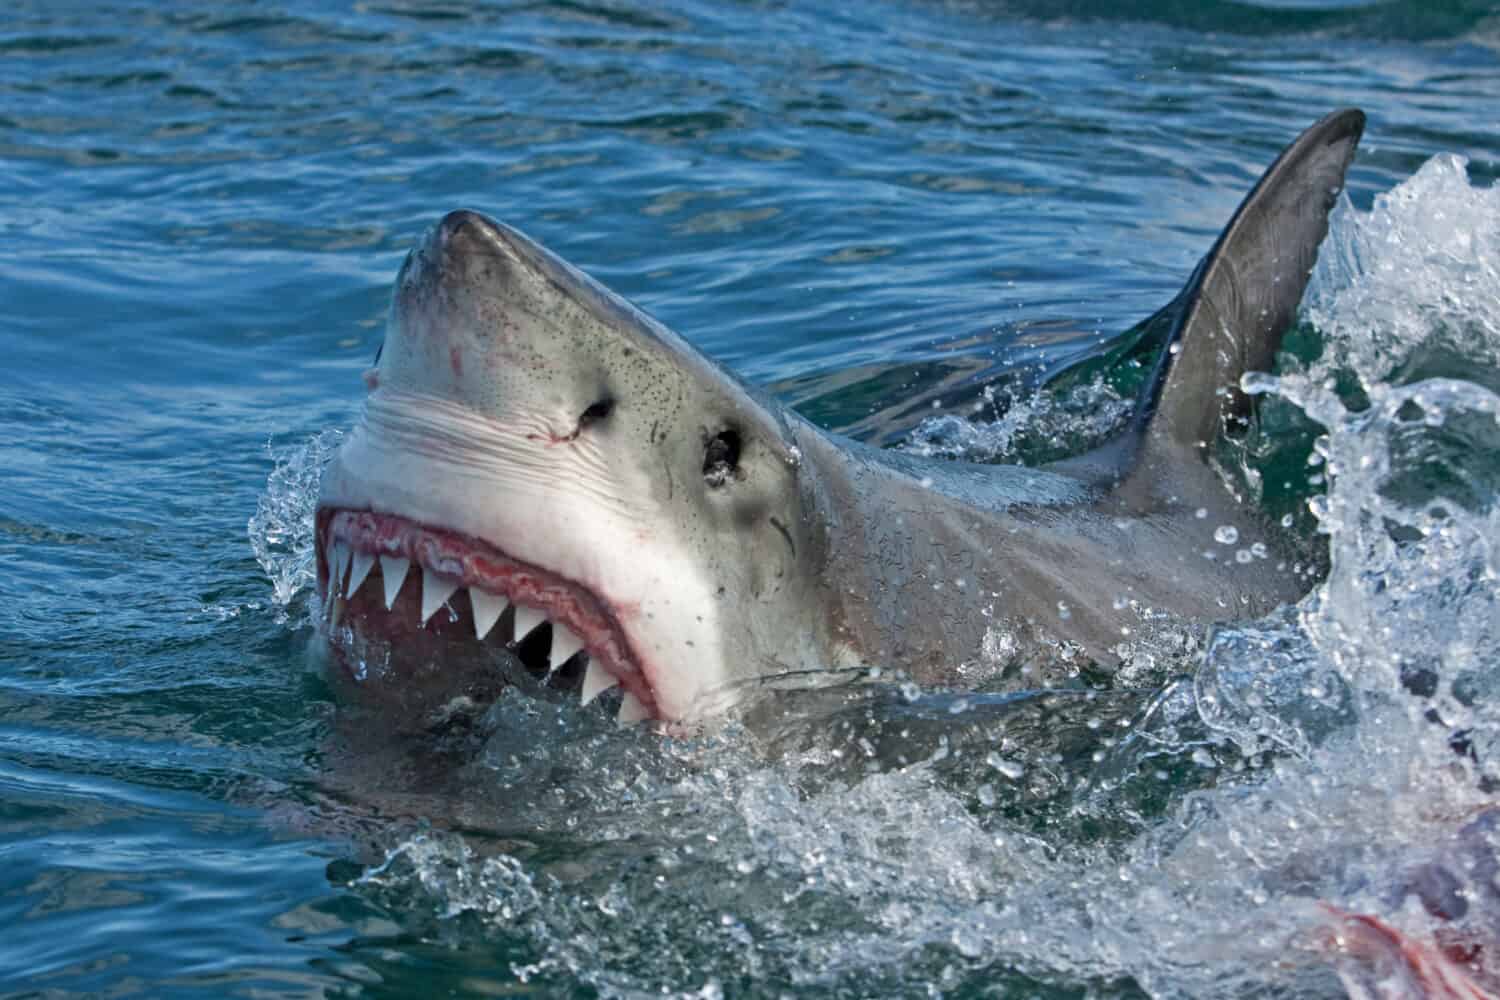 Great white shark, Carcharodon carcharias